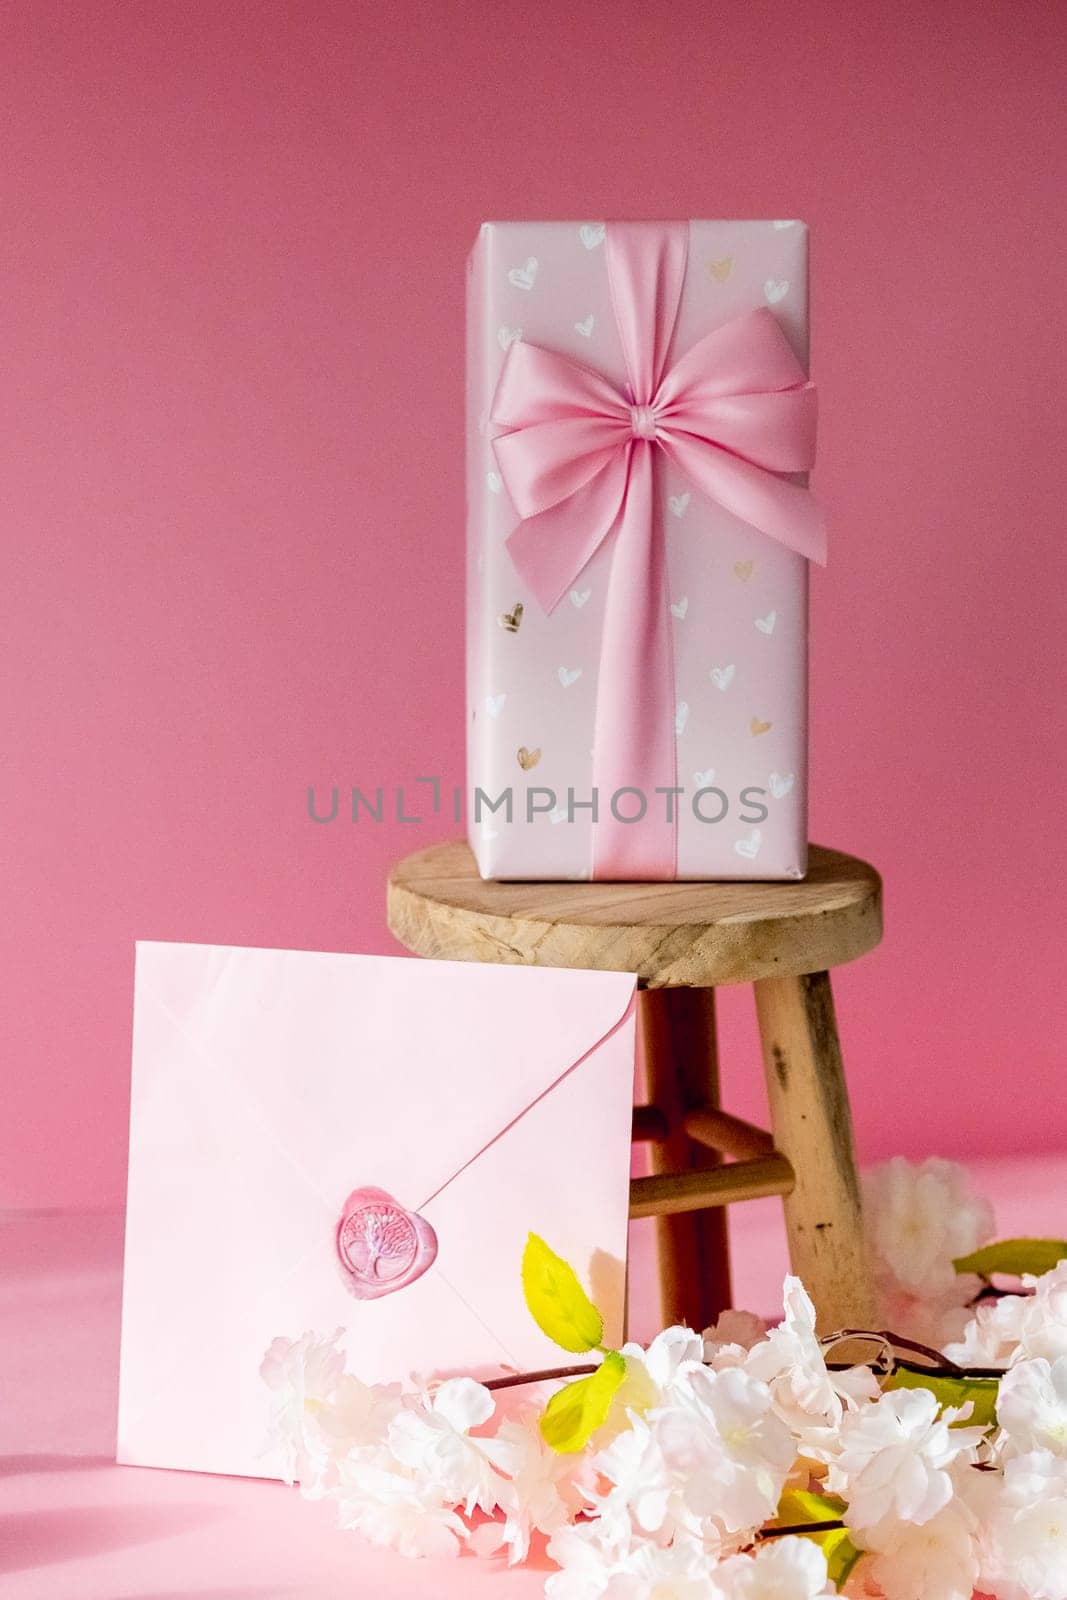 One sealed envelope, a large gift box with a bow stand on a small homemade decorative wooden stool on a pink background with a branch of apple tree blossom, side view close-up with selective focus.